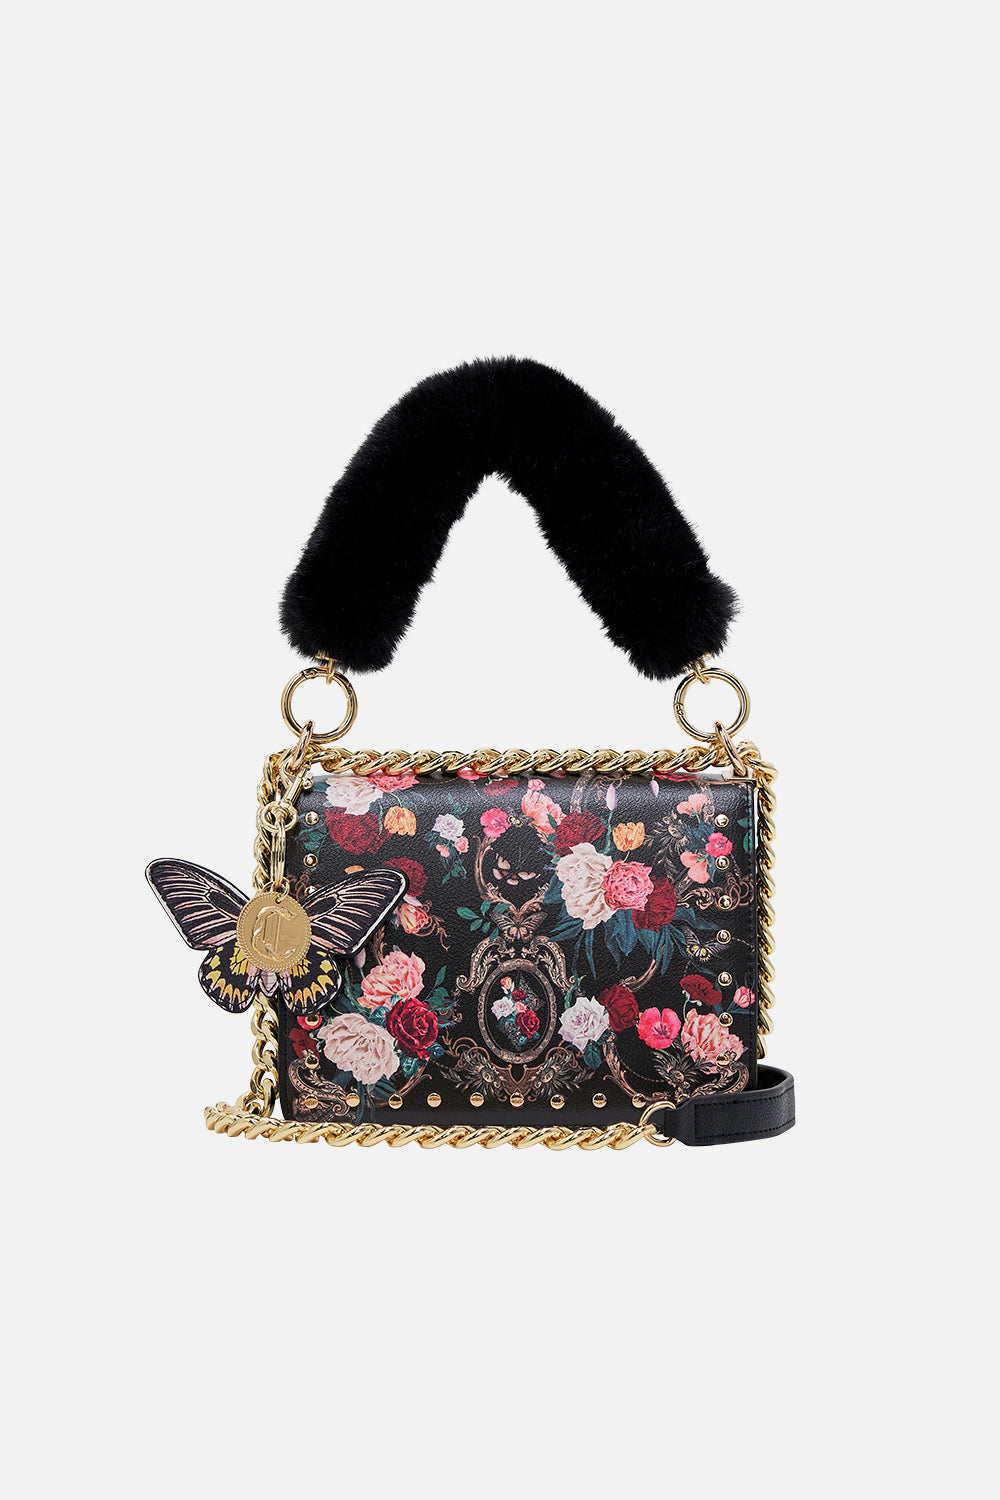 CAMILLA floral crossbody with fur strap in Magic in the Manuscripts